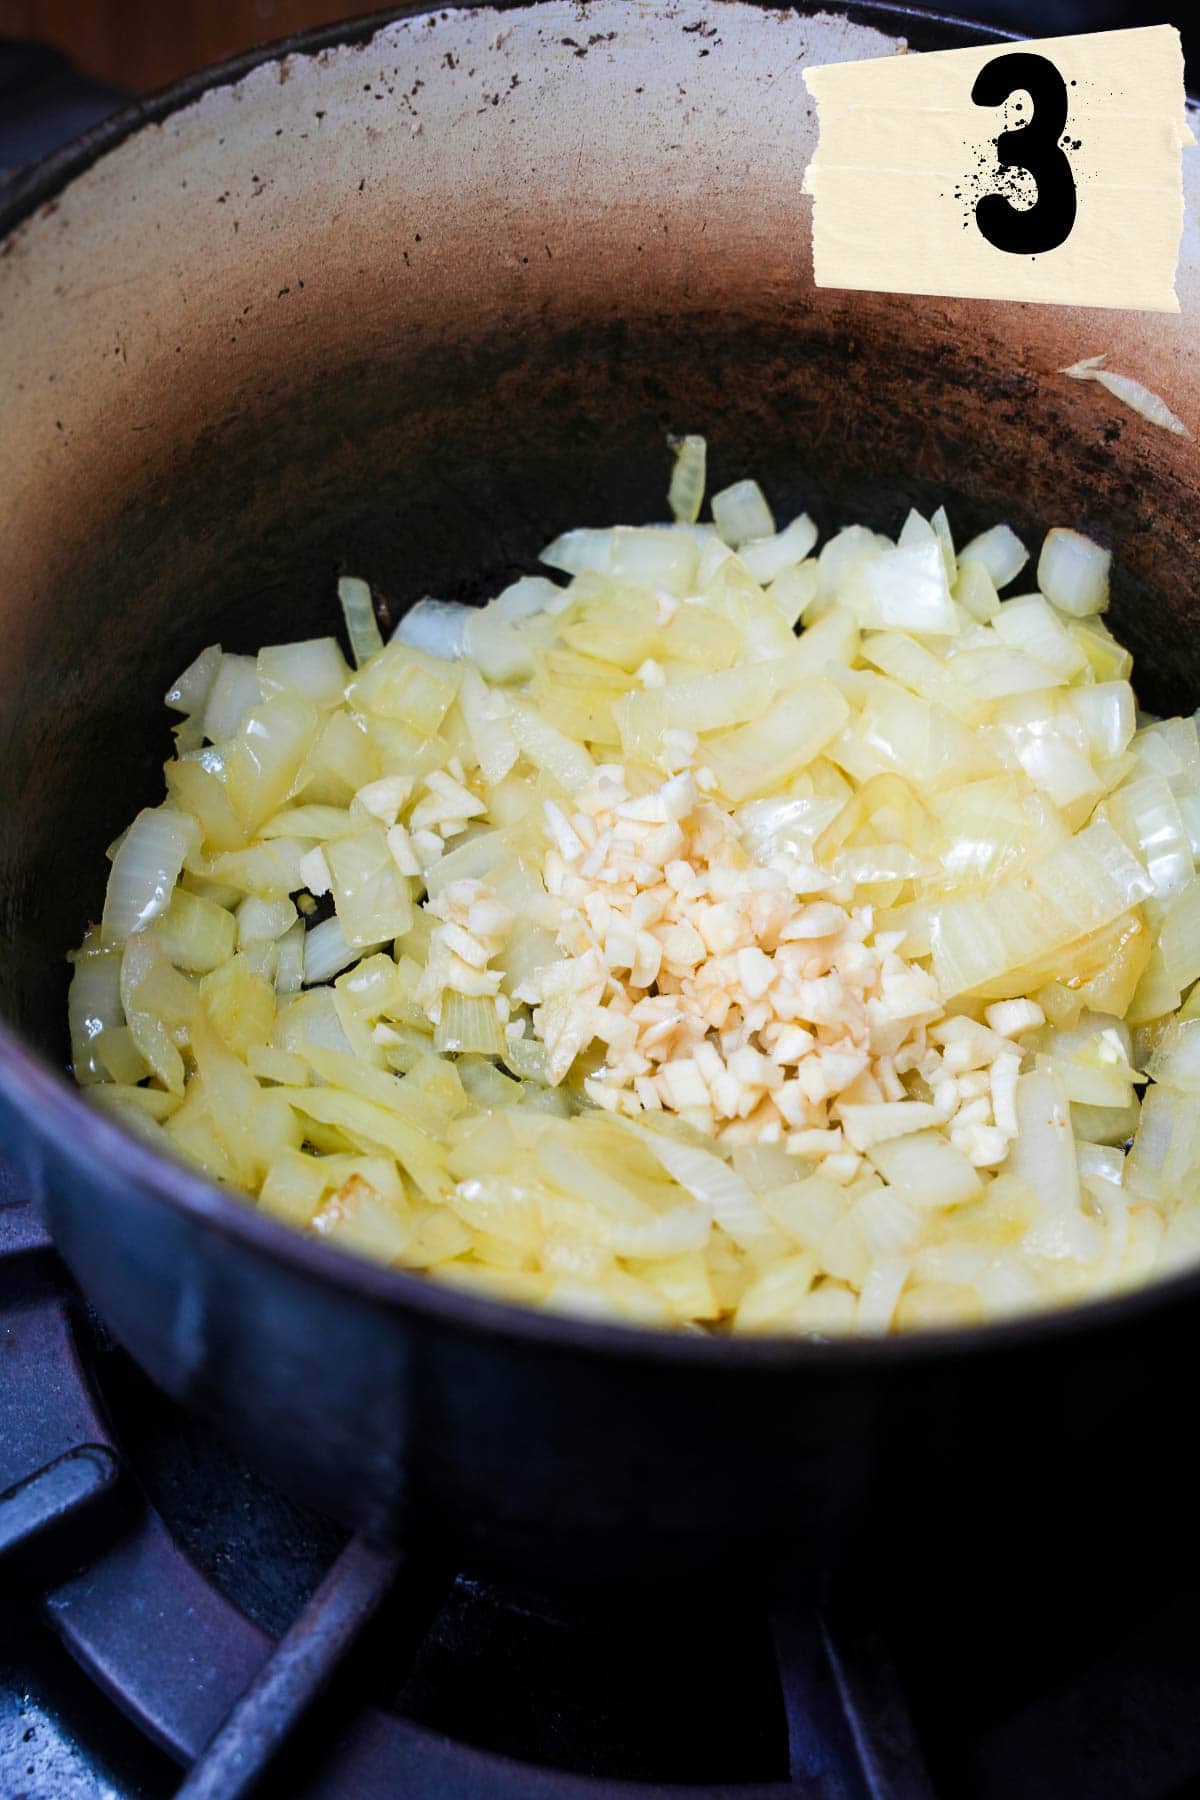 Garlic and onions sauté in a pot on the stove.